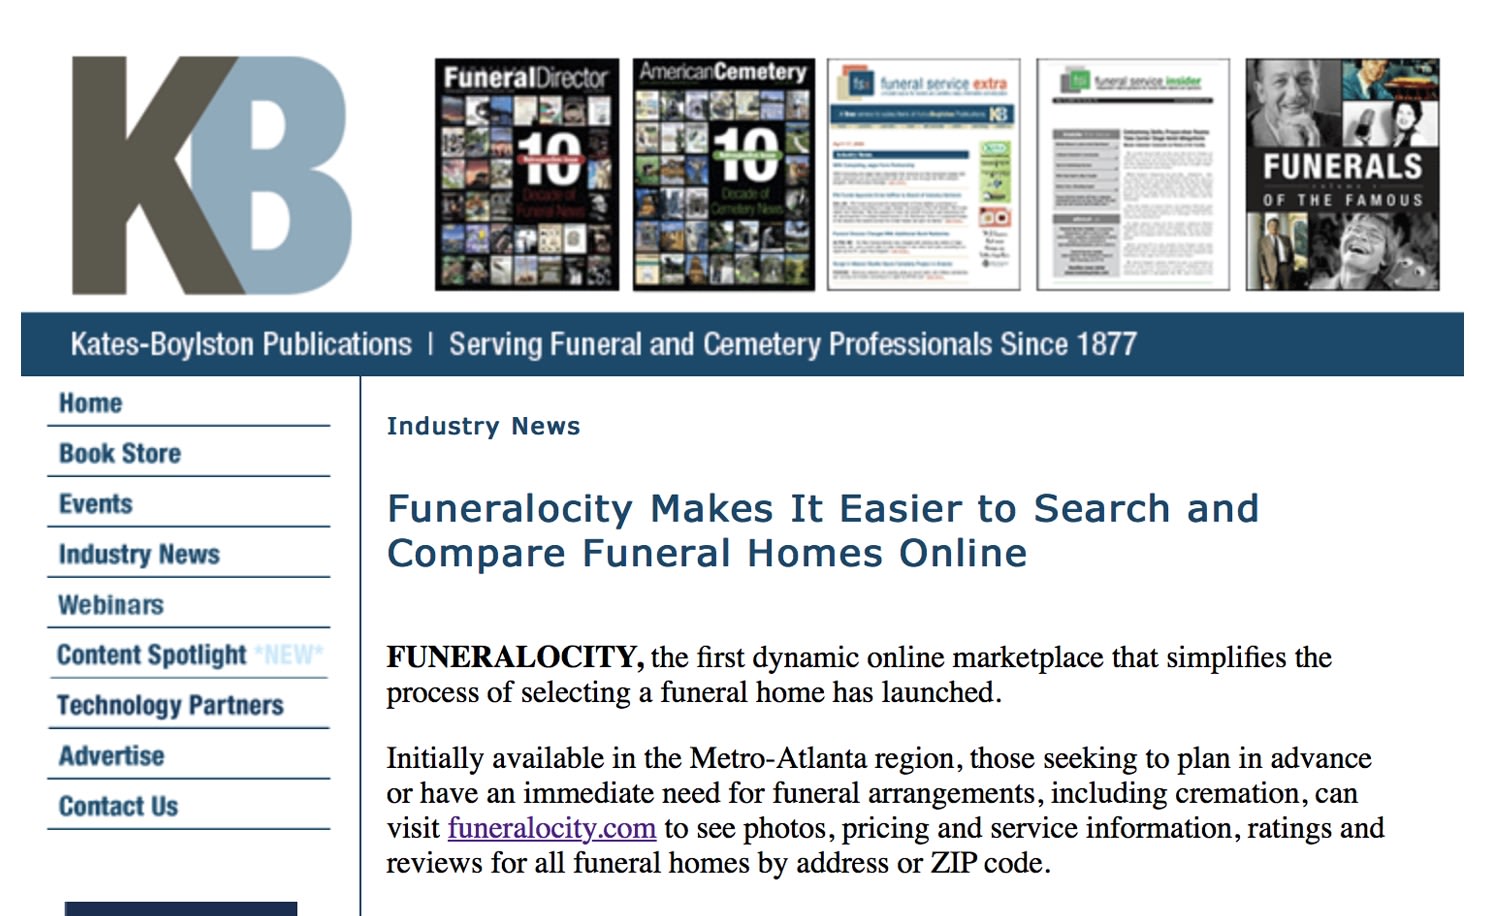 Funeral Service Insider story on the launch of Funeralocity